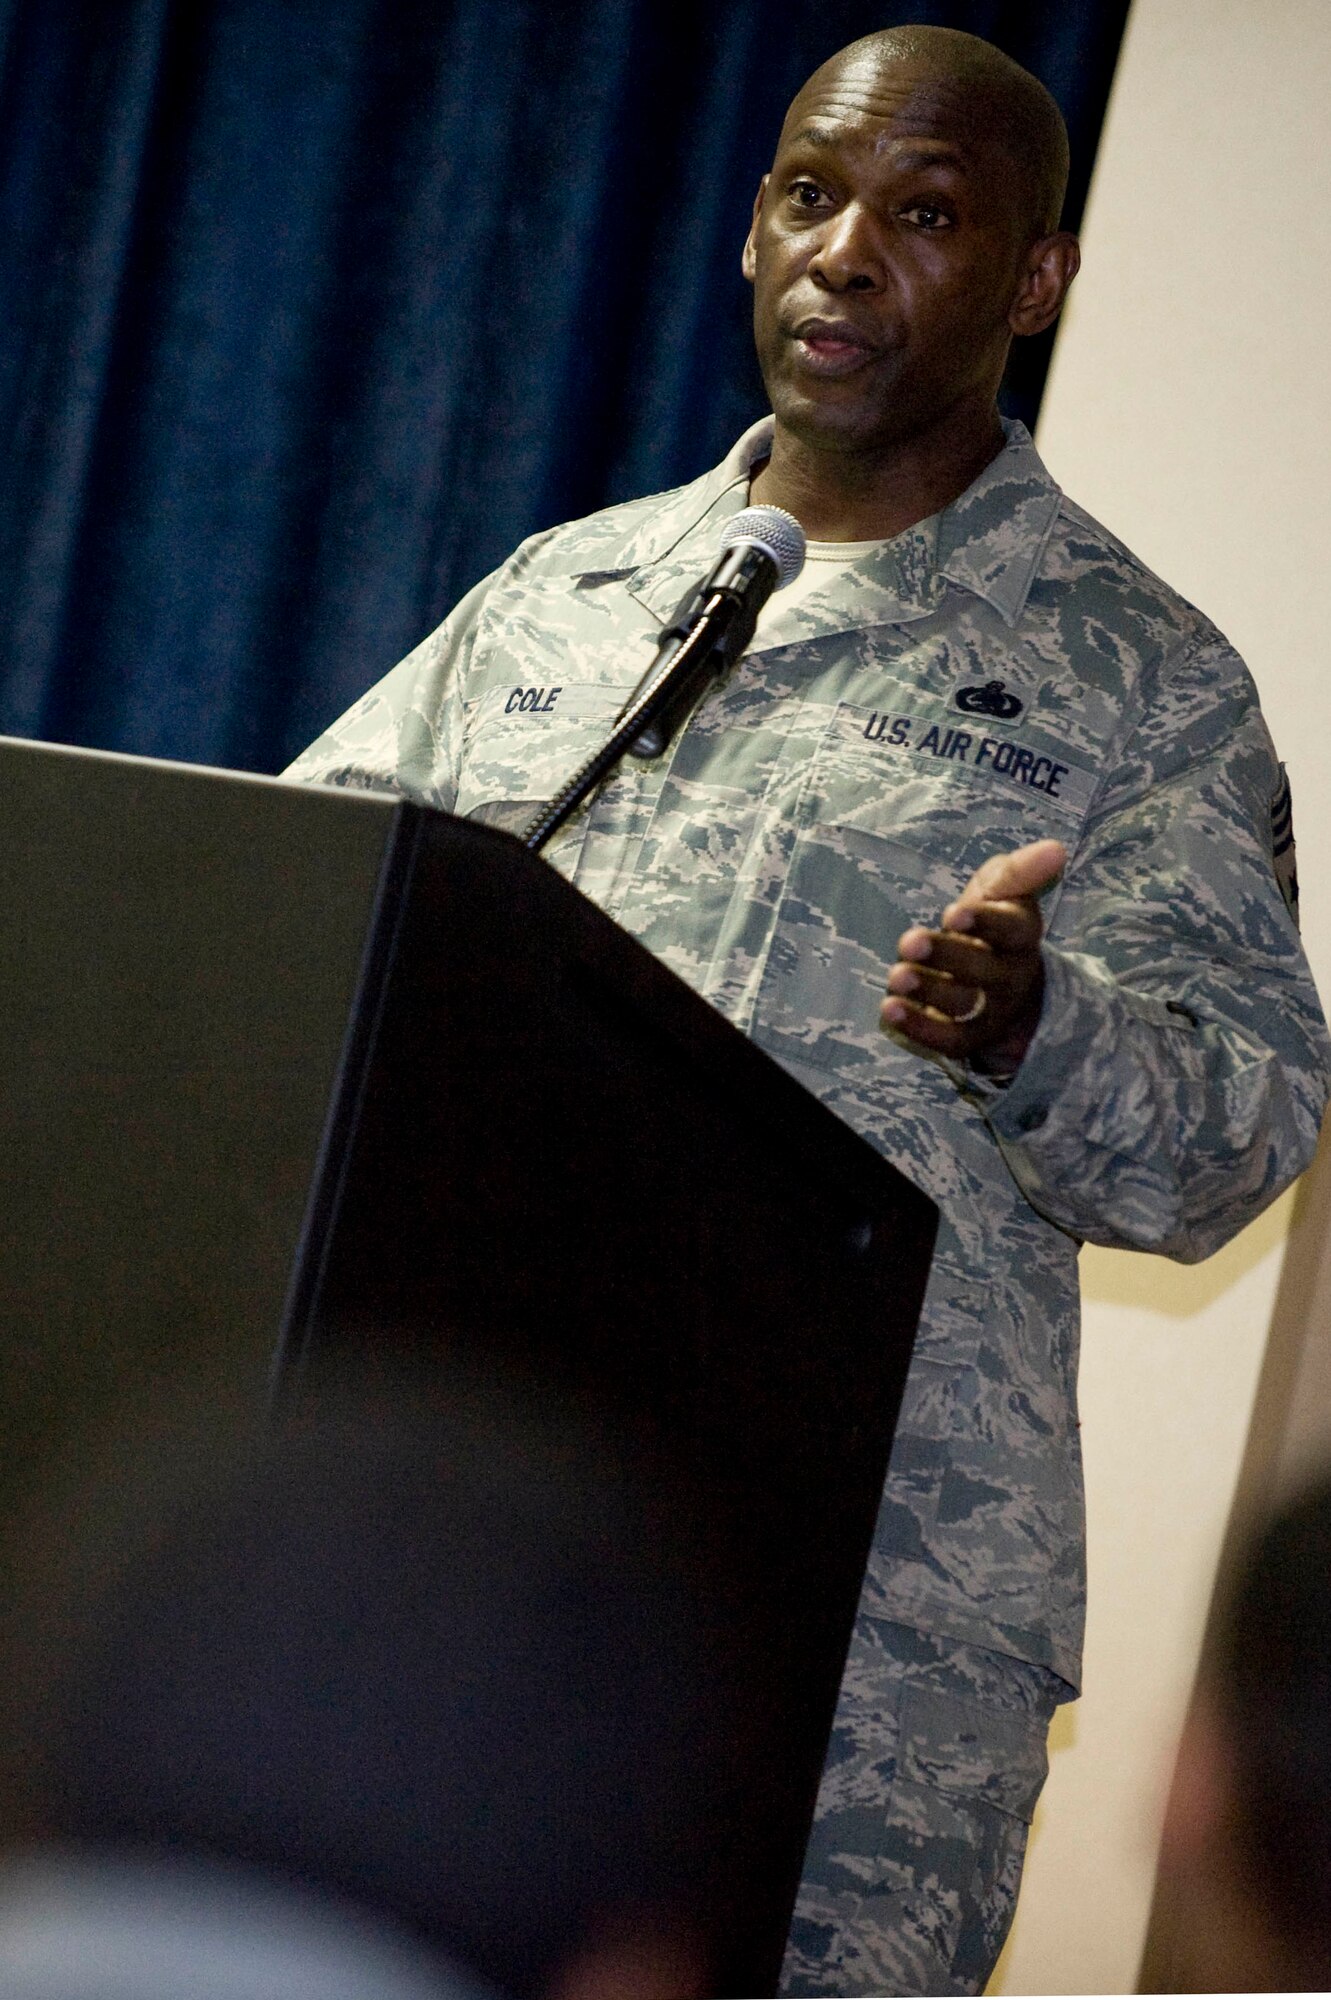 ELLSWORTH AIR FORCE BASE S.D.-- Chief Master Sgt. Clifton Cole, 28th Bomb Wing command chief, gives  advice to Ellsworth community members during a symposium, Feb. 3. The 28th Bomb Wing African-American Heritage Committee planned the symposium to inform the Ellsworth community how to succeed financially, achieve education goals and build their career. (U.S. Air Force photo/Airman 1st Class Corey Hook)